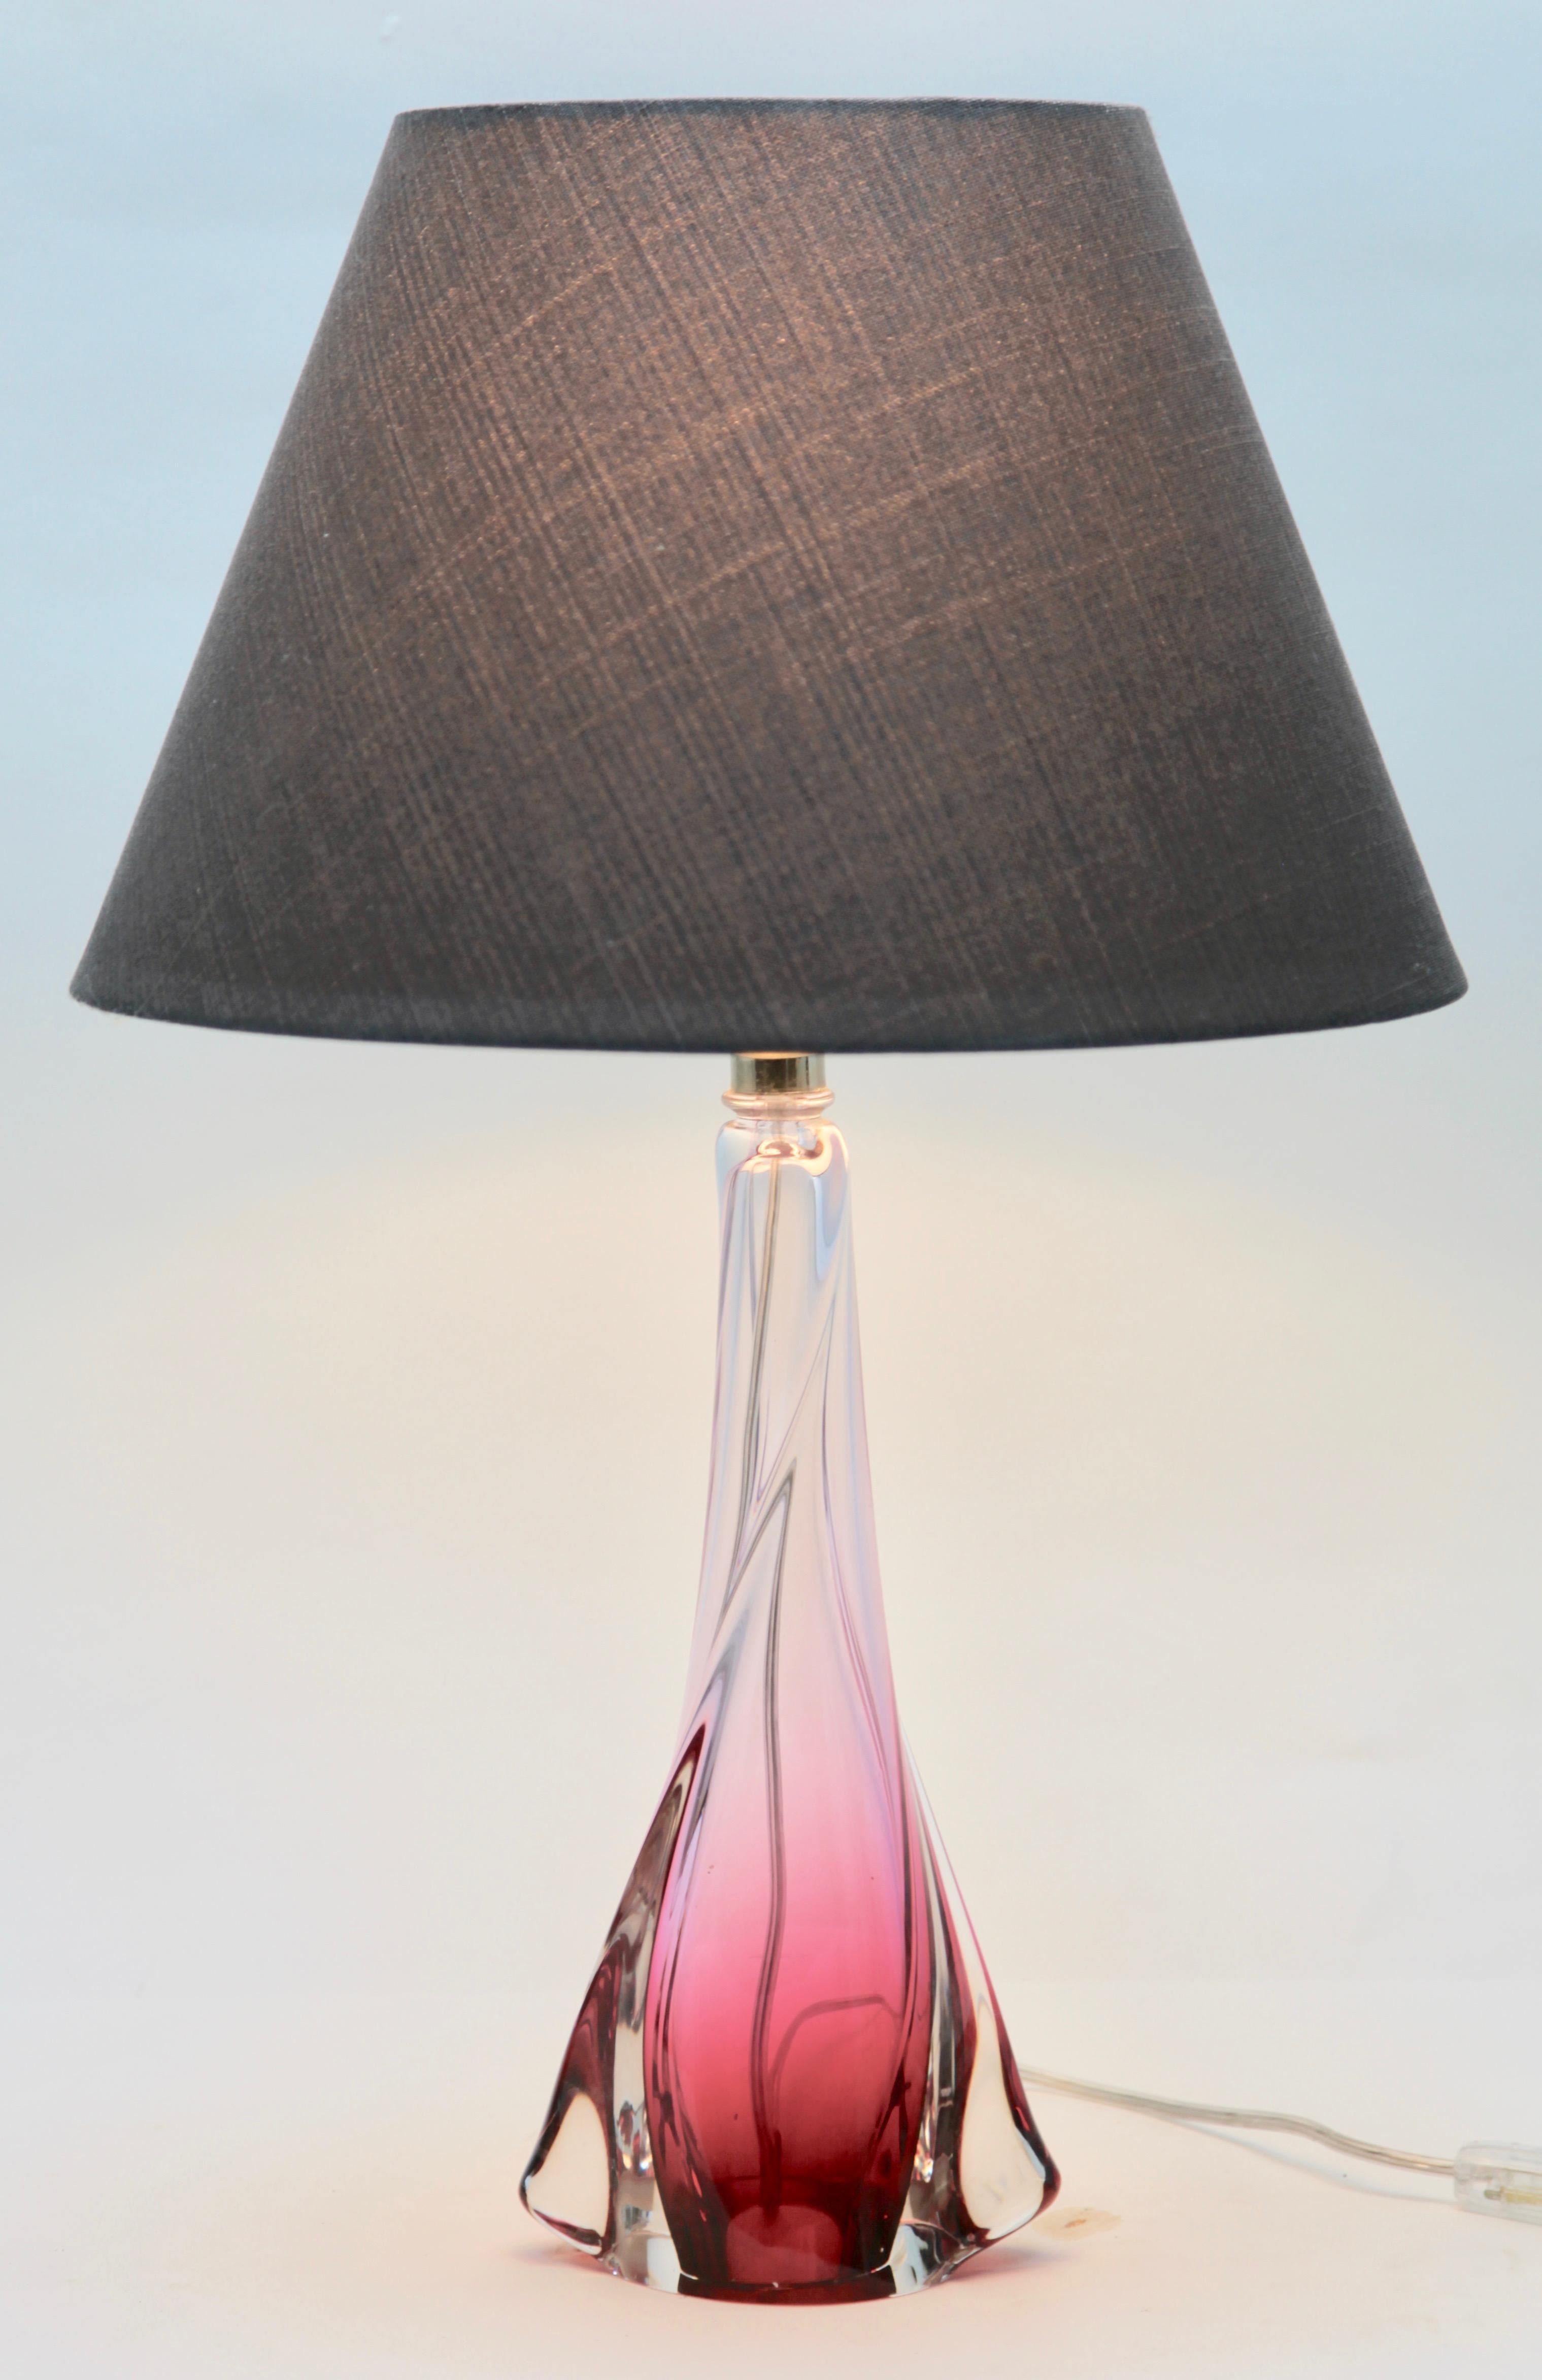 Hand-Crafted Val Saint Lambert Label 'Twisted Light' Crystal Table Lamp, 1953